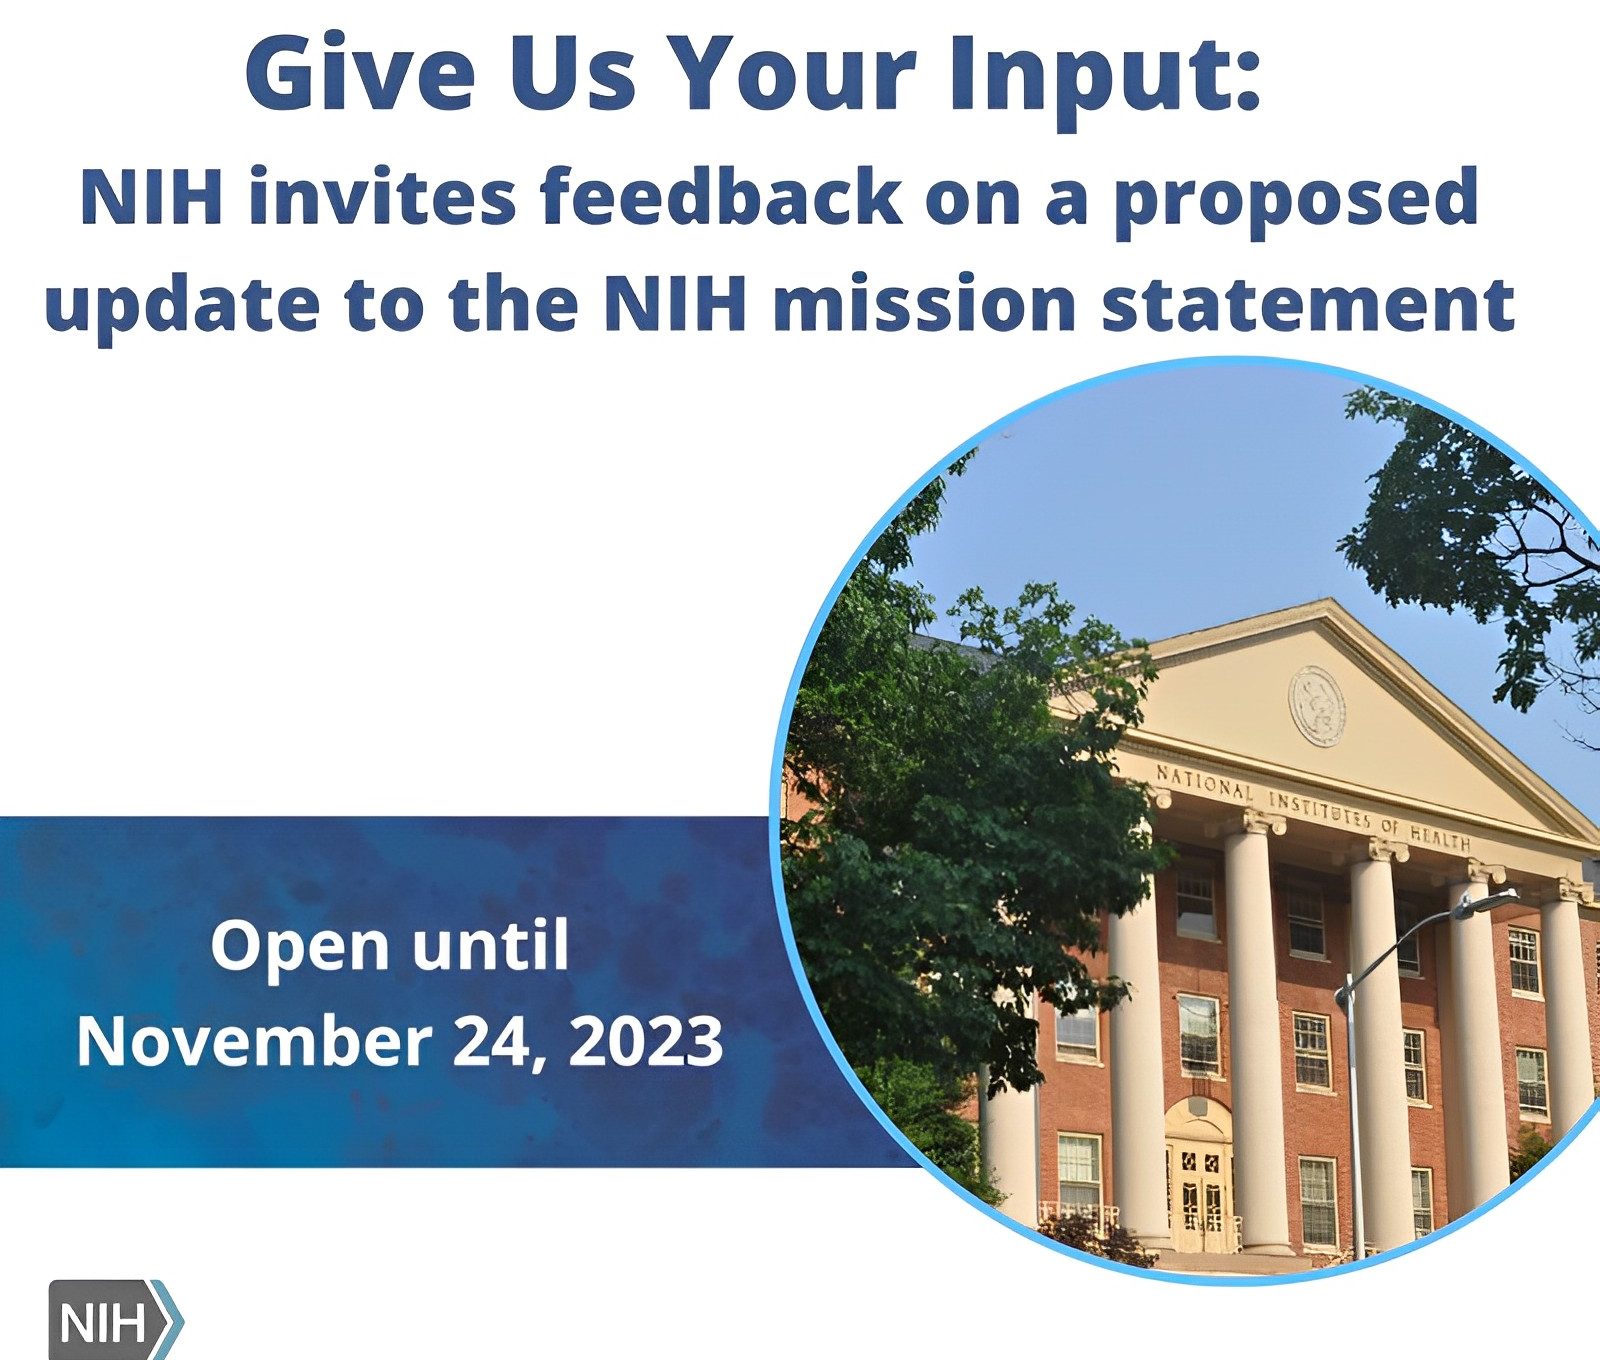 the-national-institutes-of-health-nih-is-seeking-your-feedback-on-a